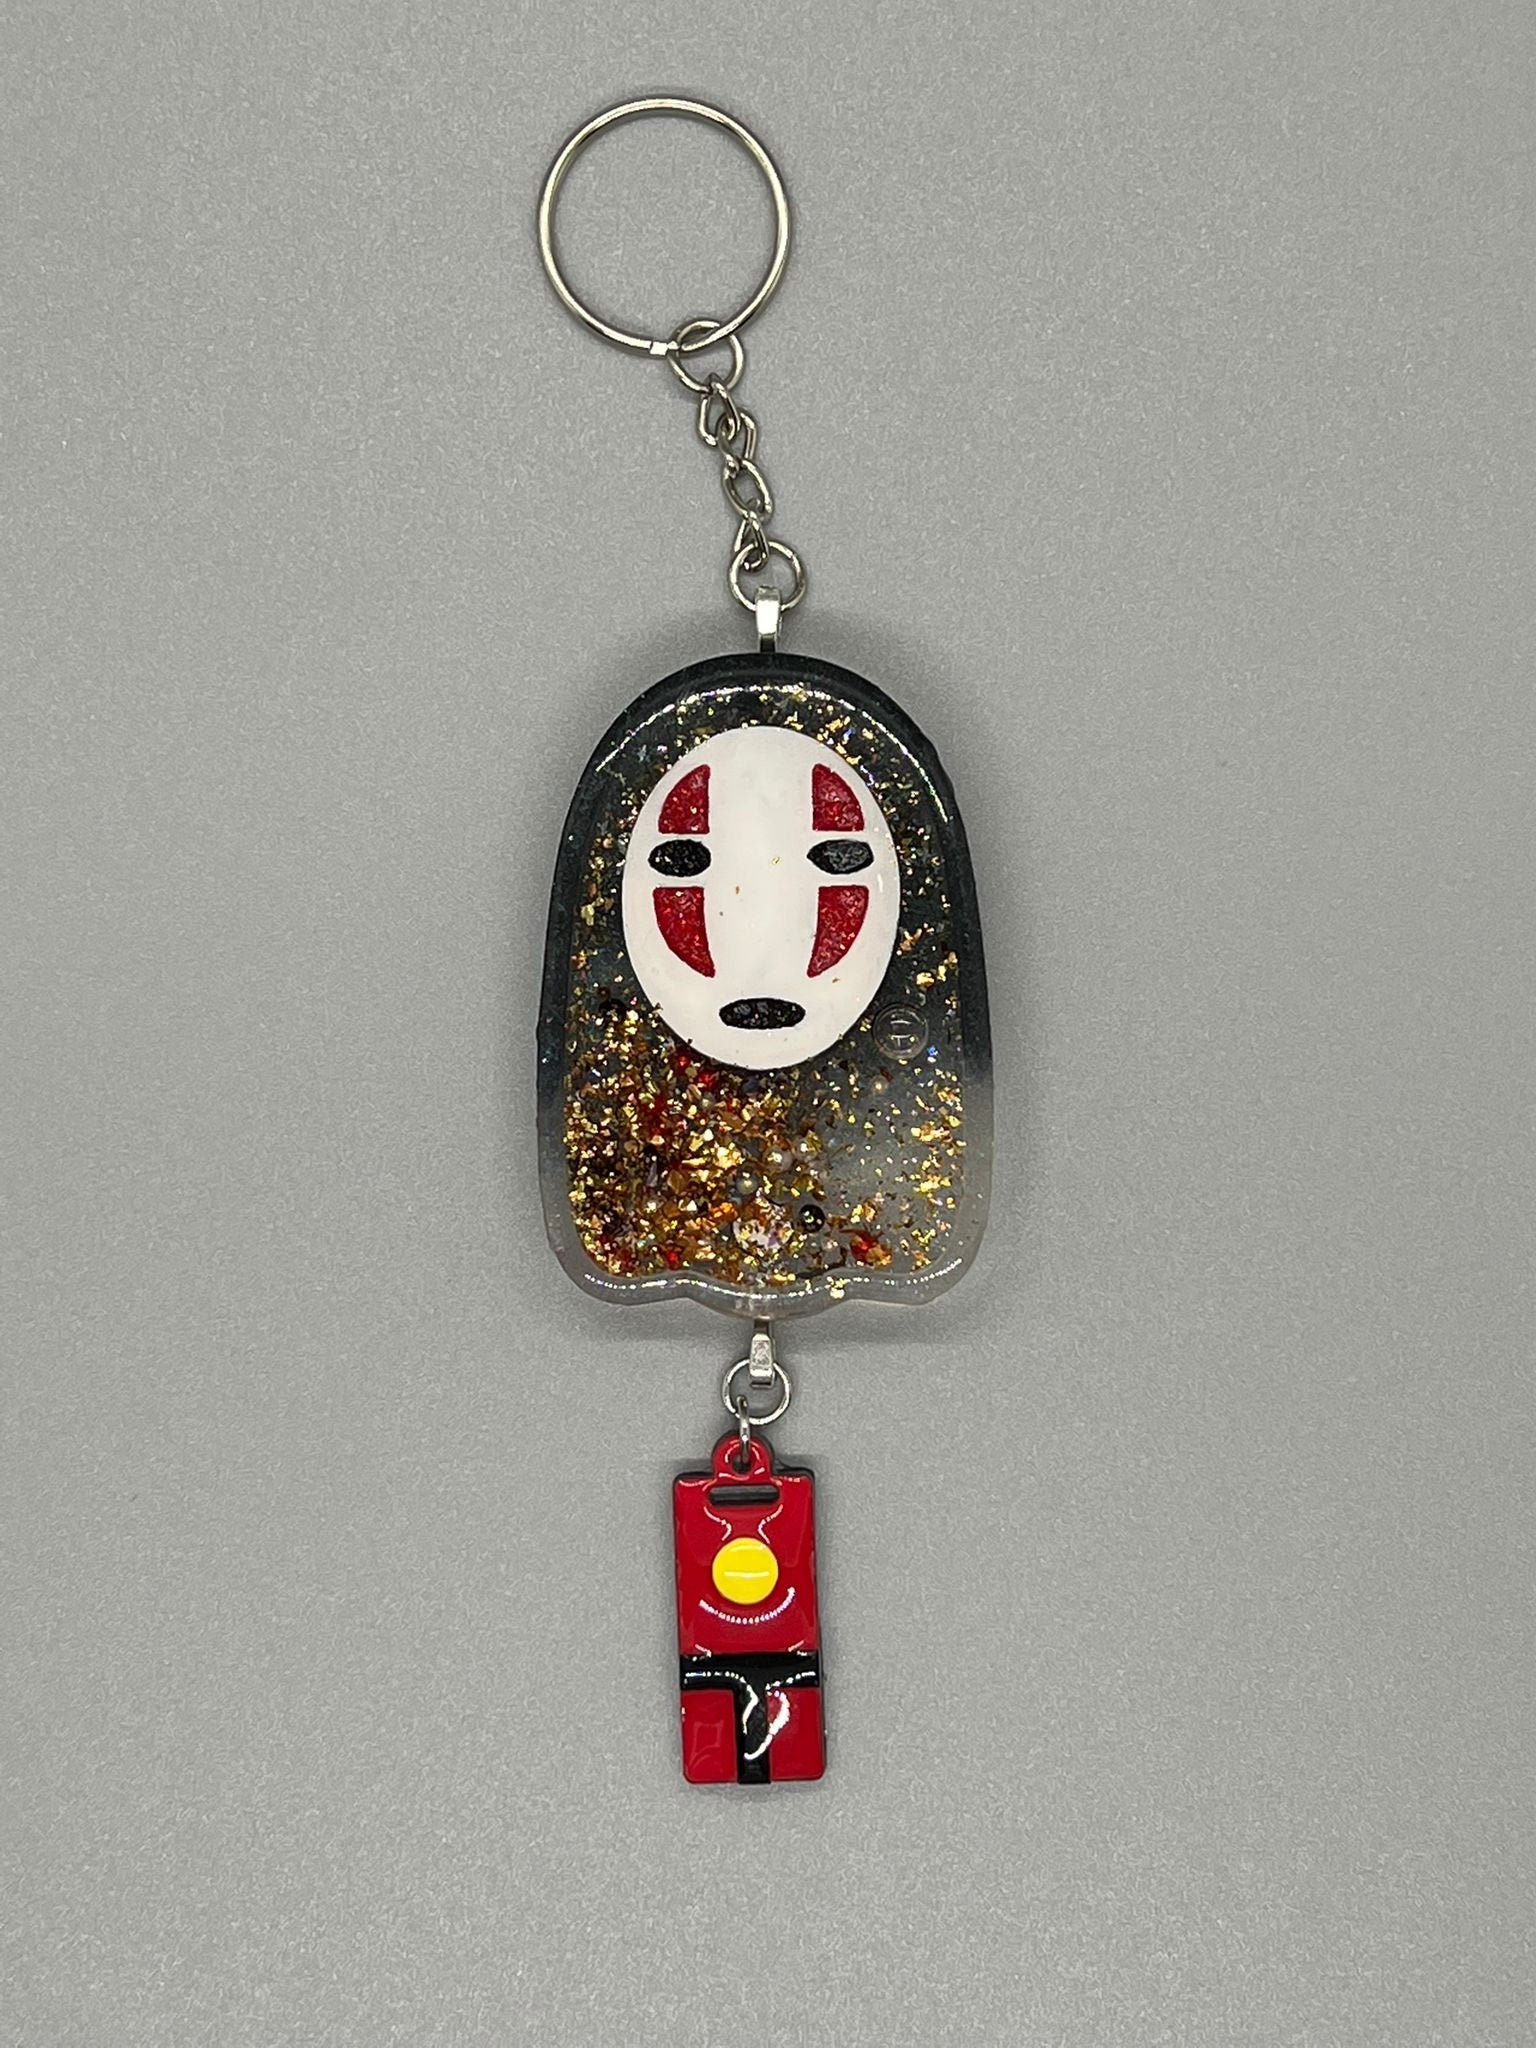 No-Face Shaker Keychain - Gold And Holographic Fillers - Hand-Painted Details - Resin Crafts